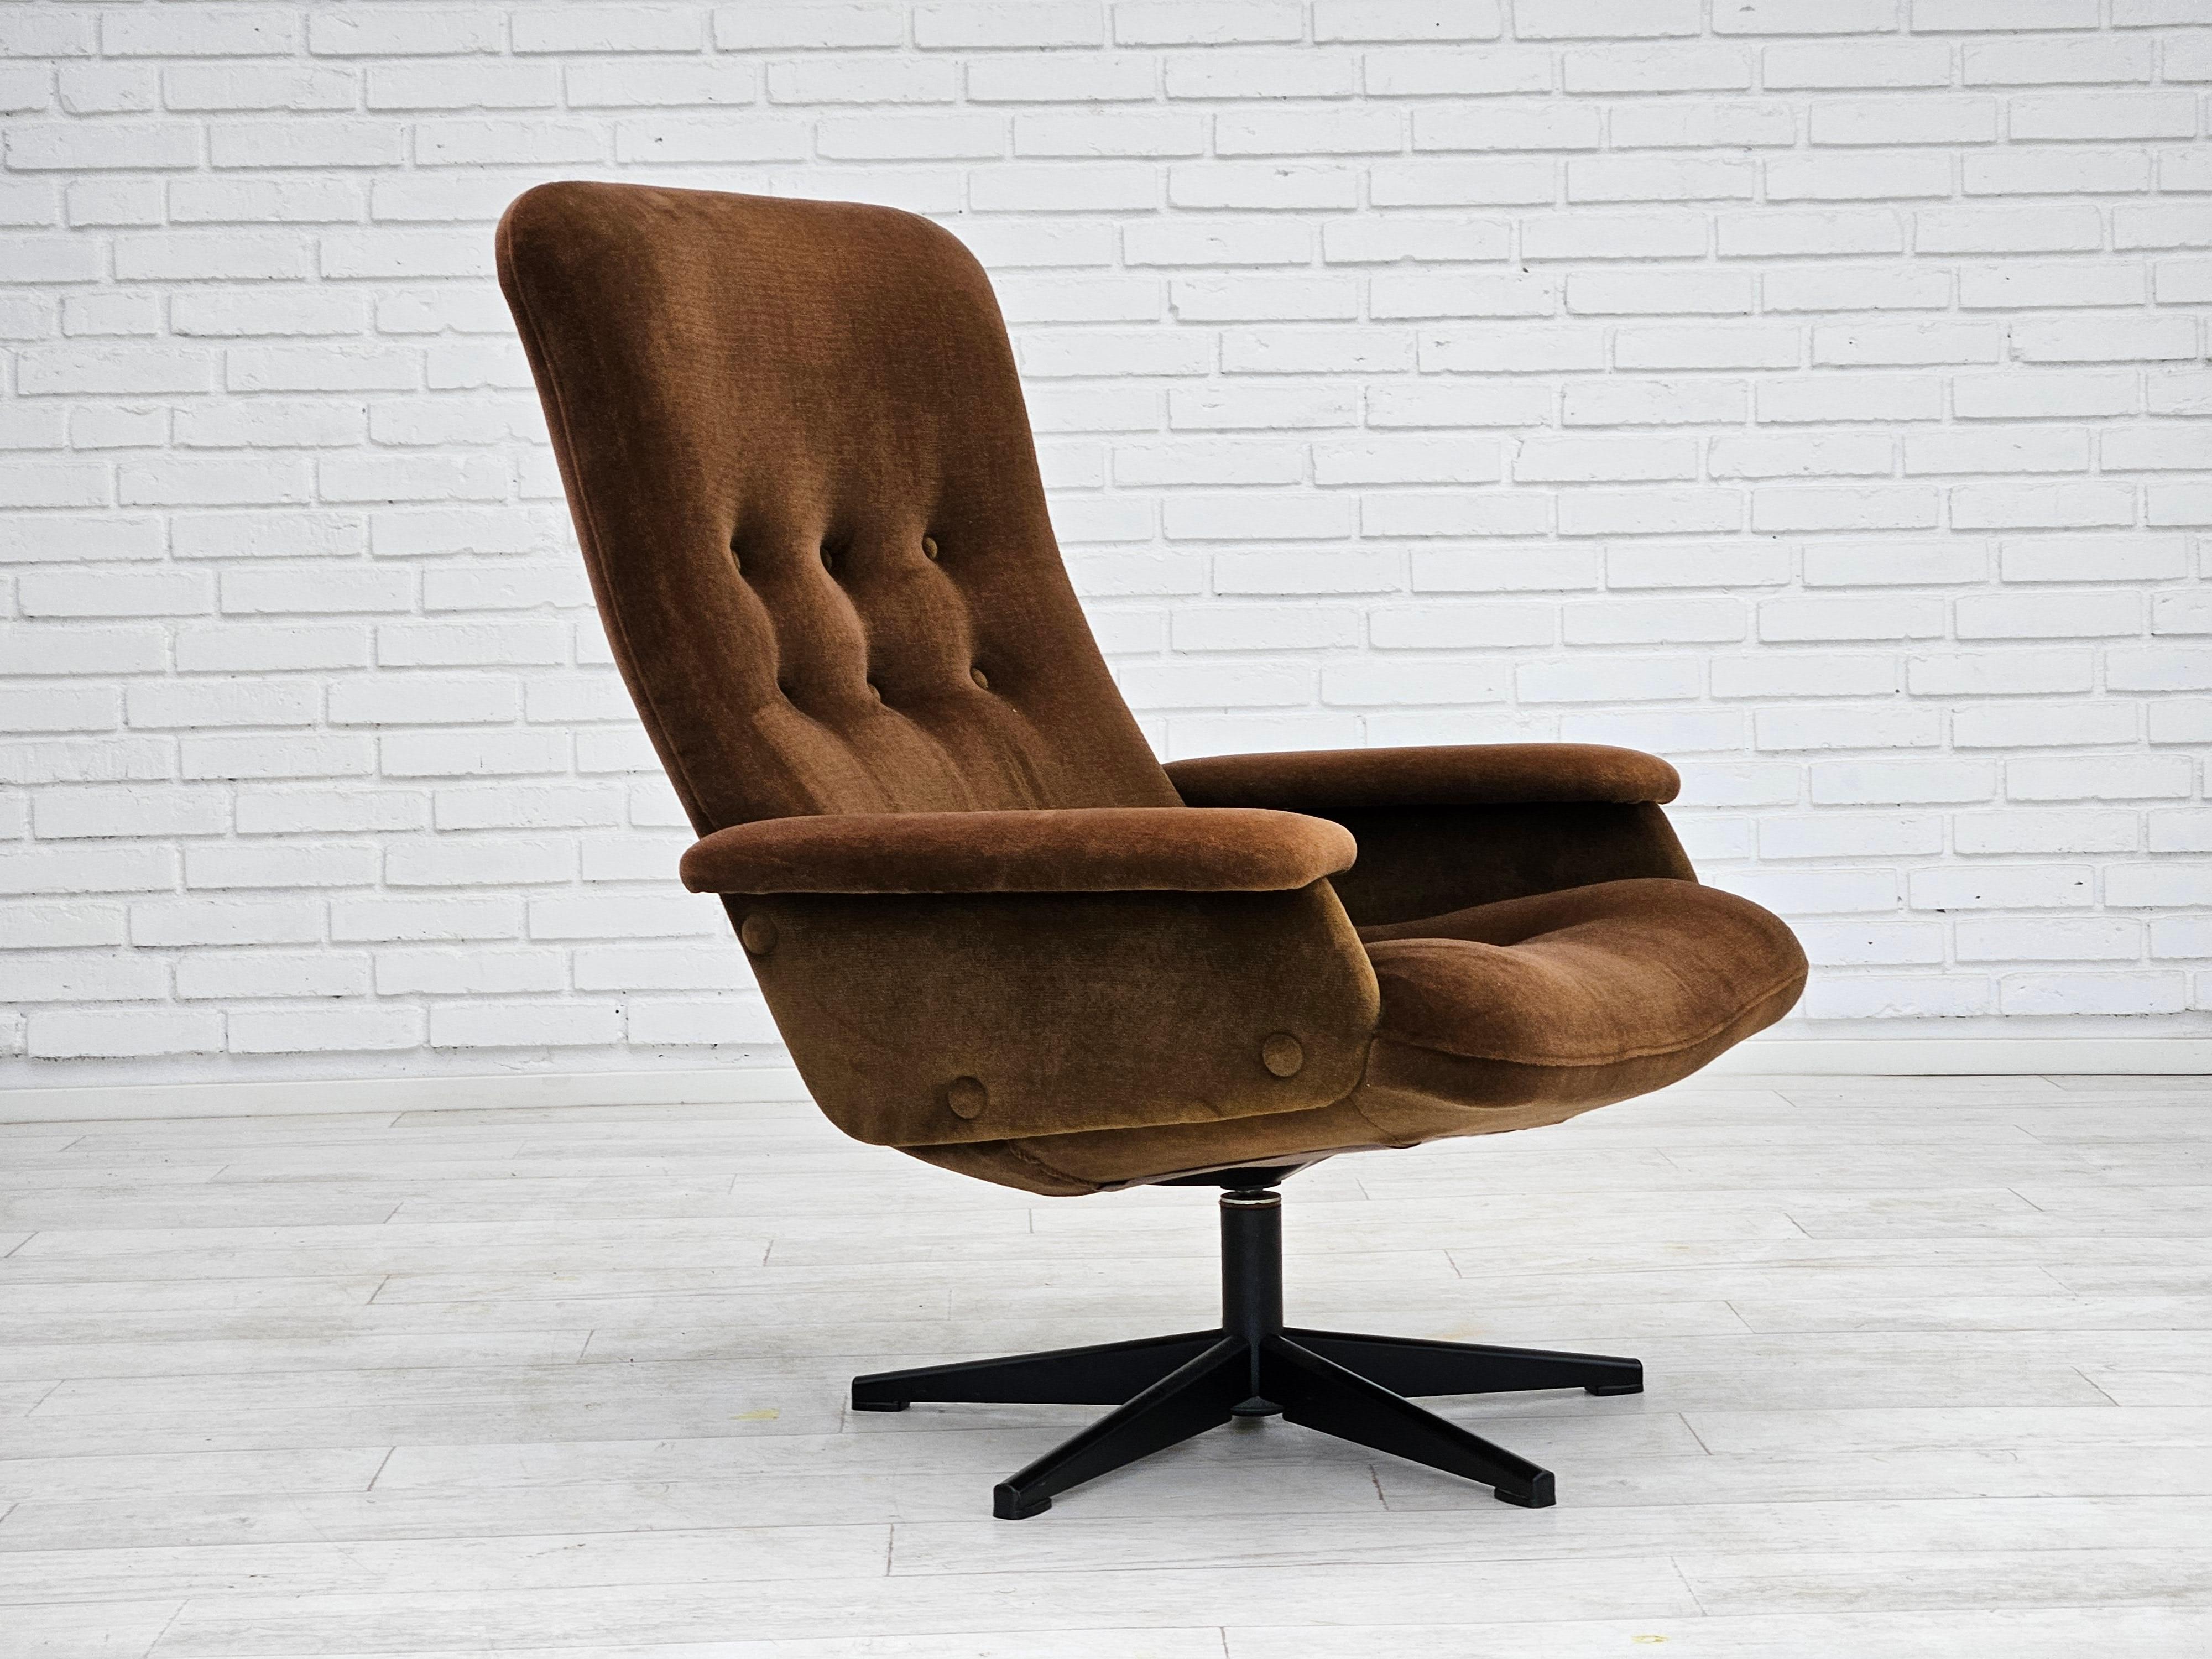 1970s, Scandinavian design. Swivel chair five-star base. Dark brown velour. Original very good condition: no smells and no stains. Manufactured by Swedish or Danish furniture manufacturer in about 1970s.